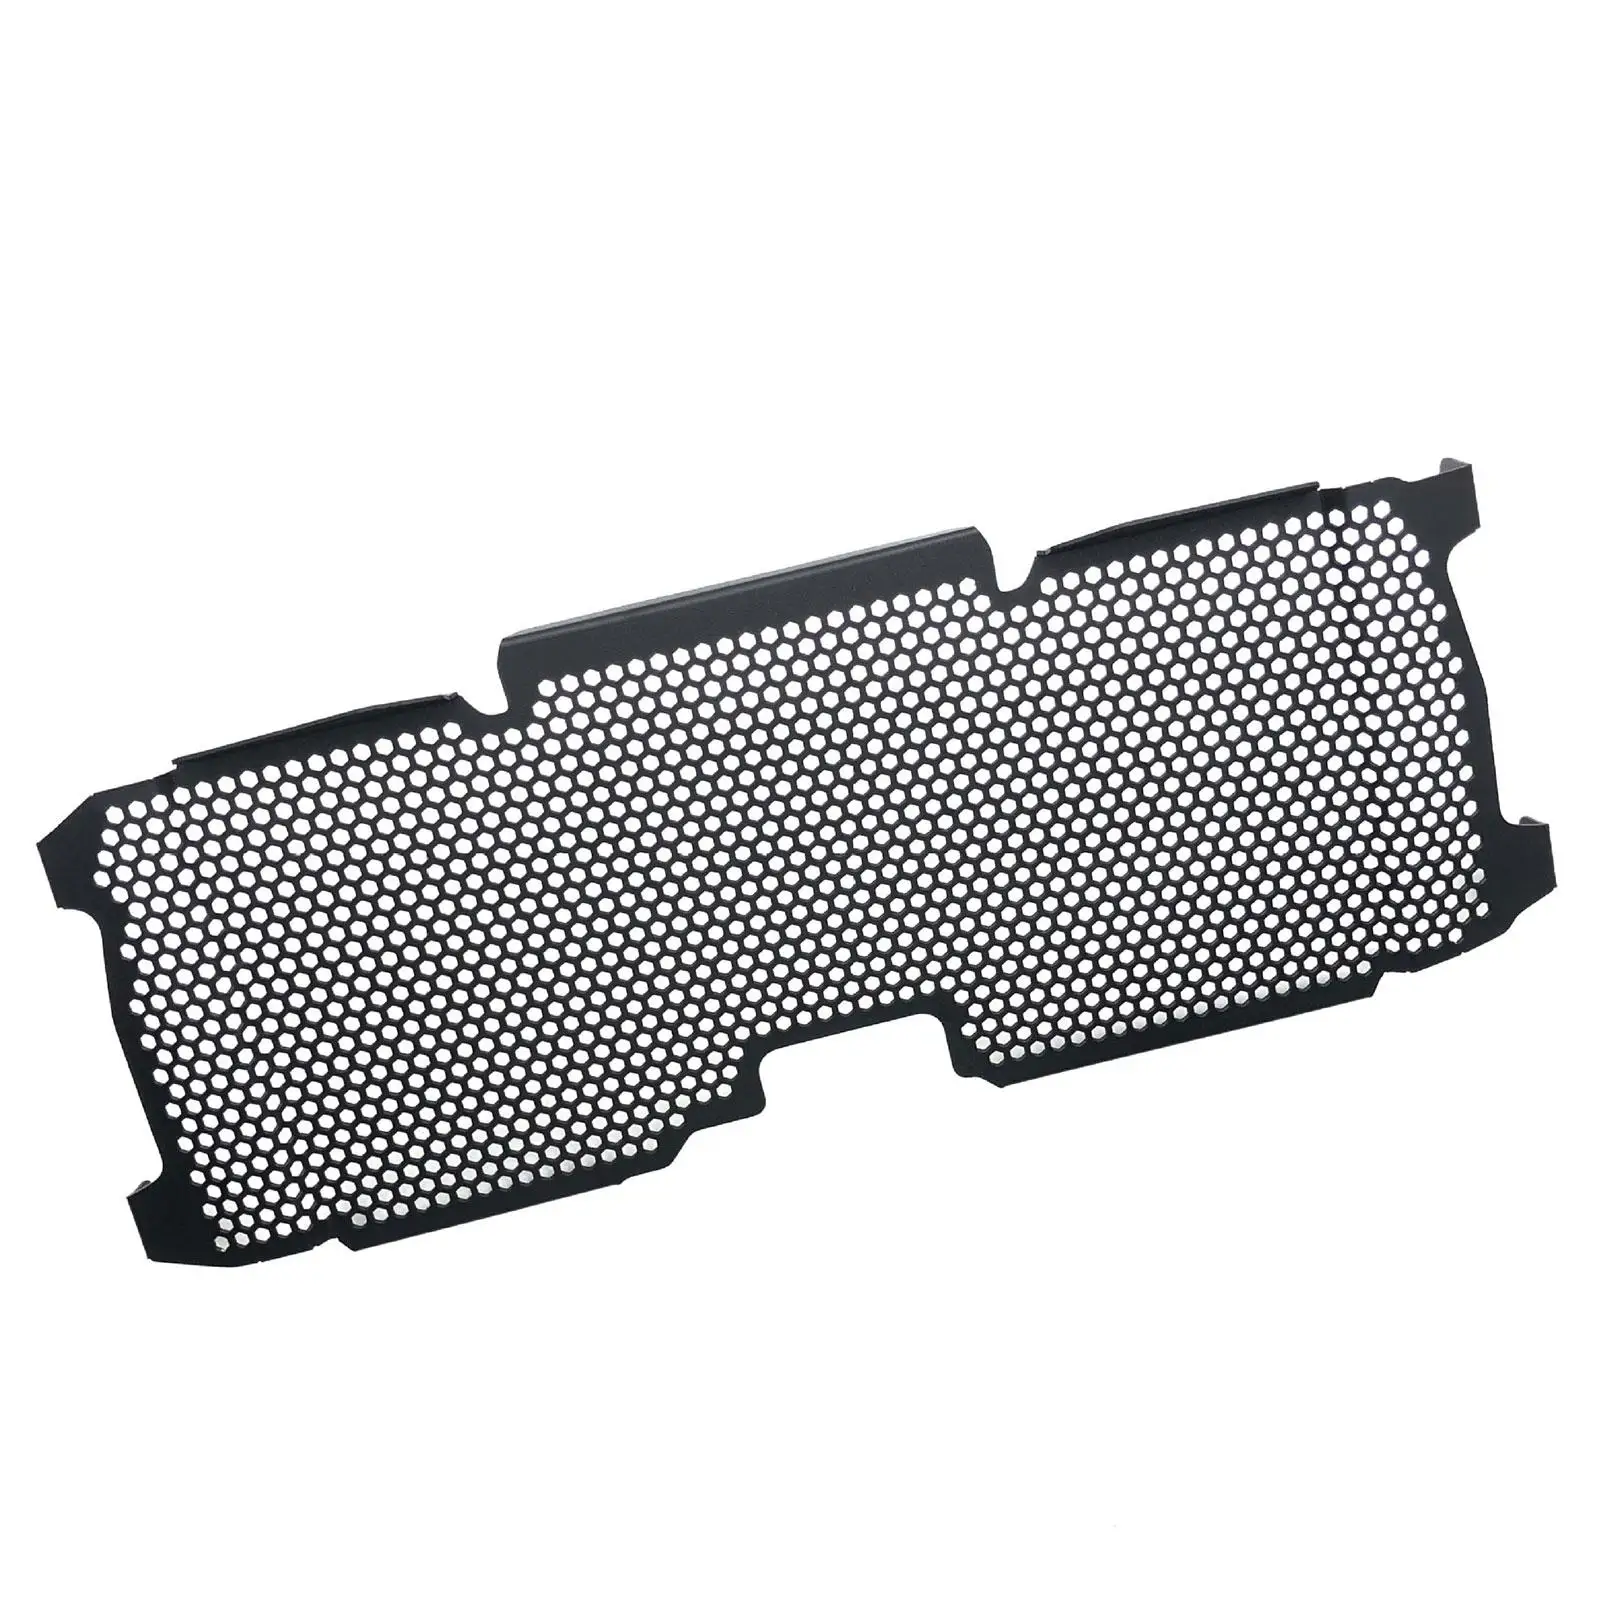 Radiator Grille Guard Protector Grill Cover Motorcycle Refits Easy to Install